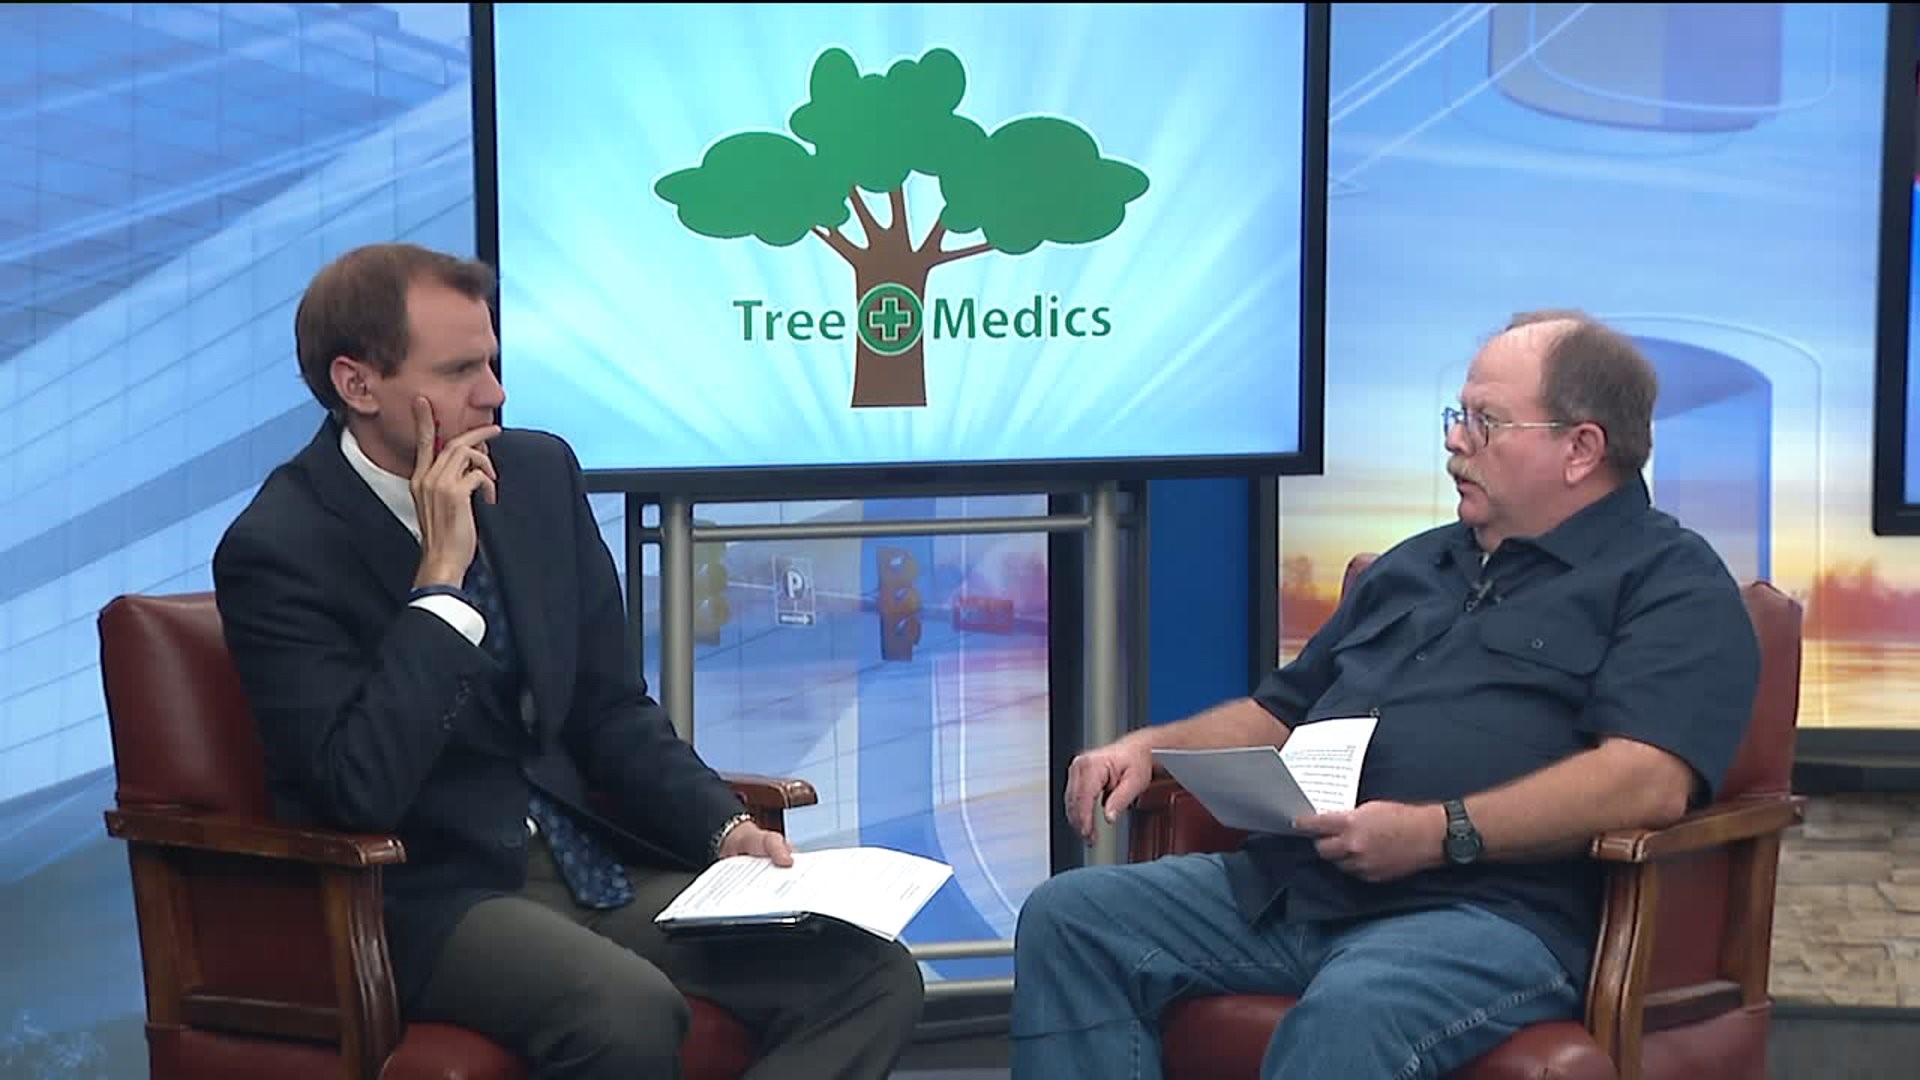 Need to fight the emerald ash borer? Local business can help